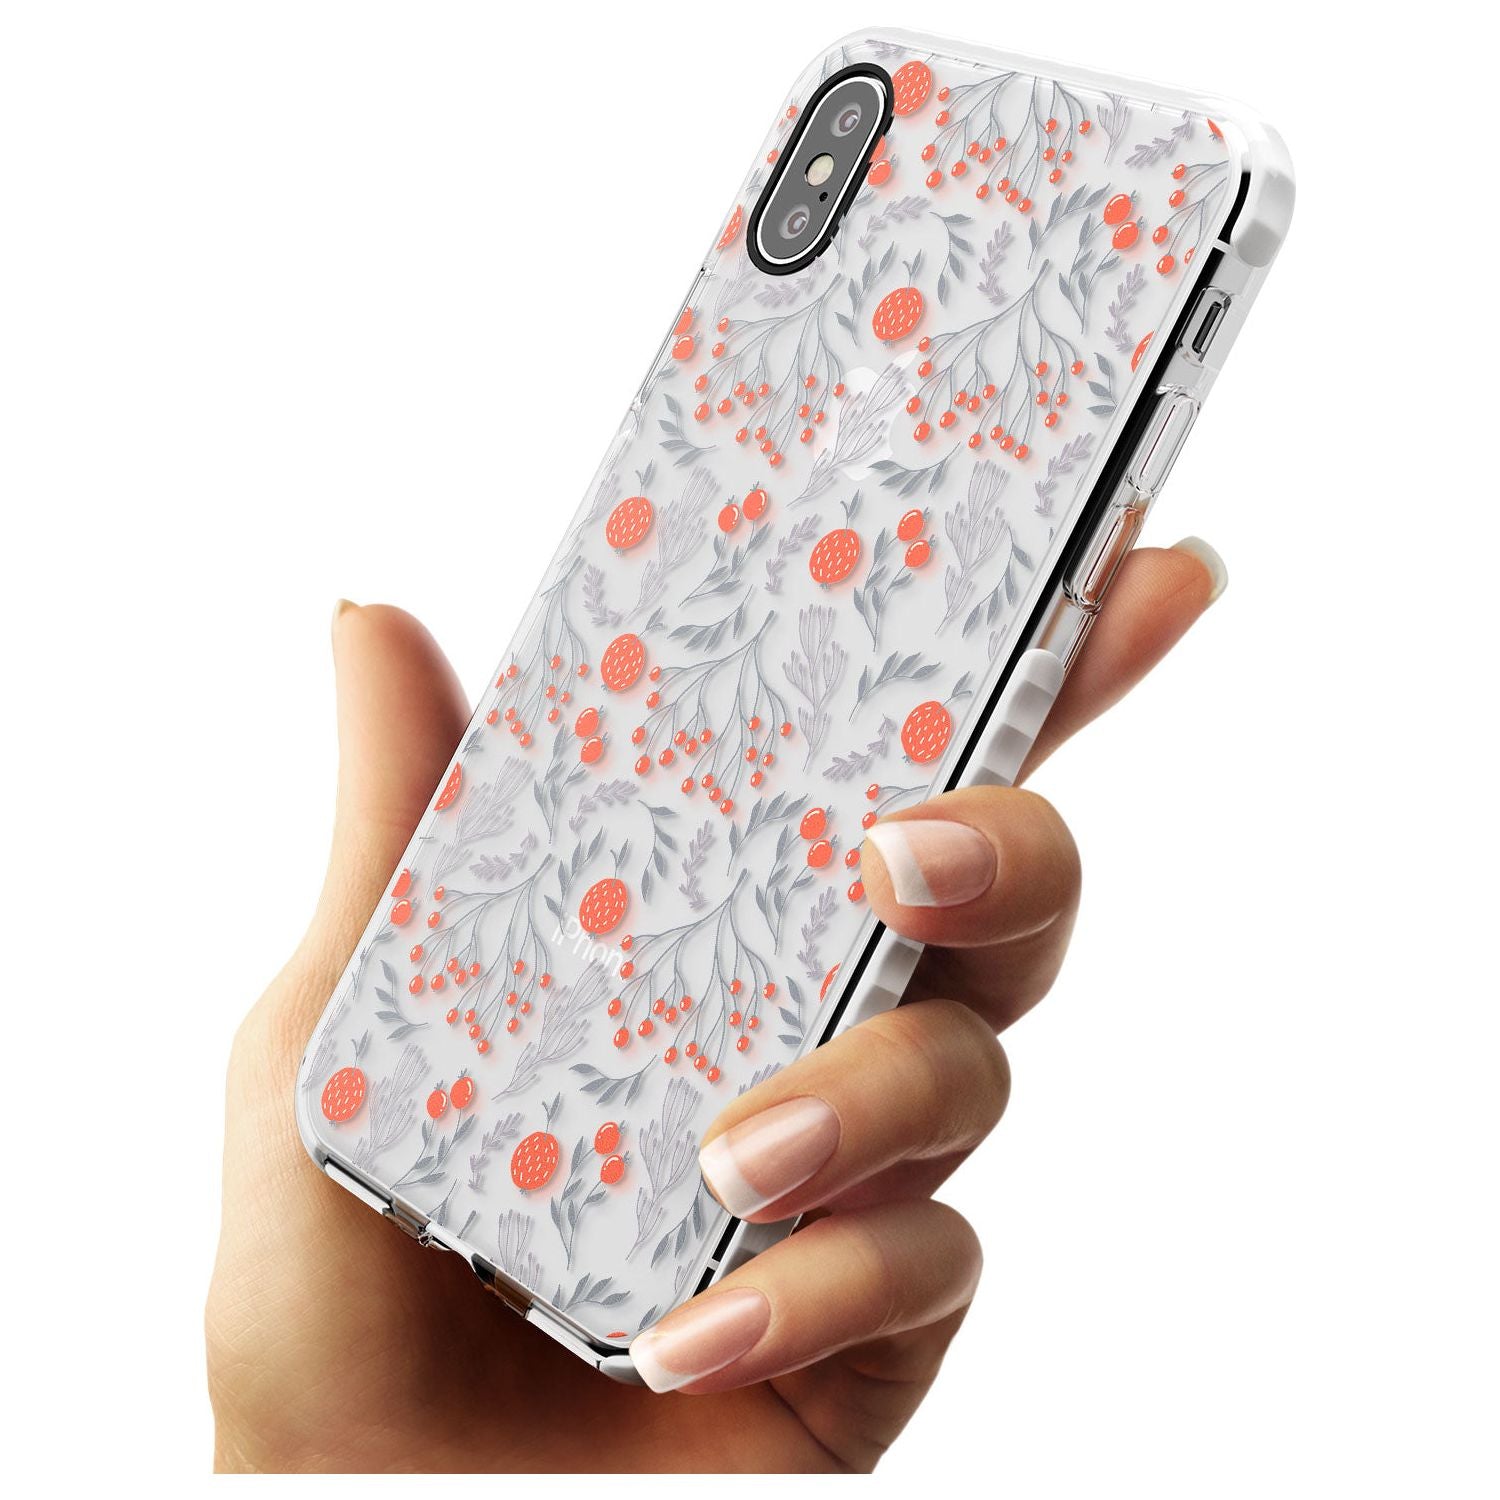 Red Fruits Transparent Floral Impact Phone Case for iPhone X XS Max XR